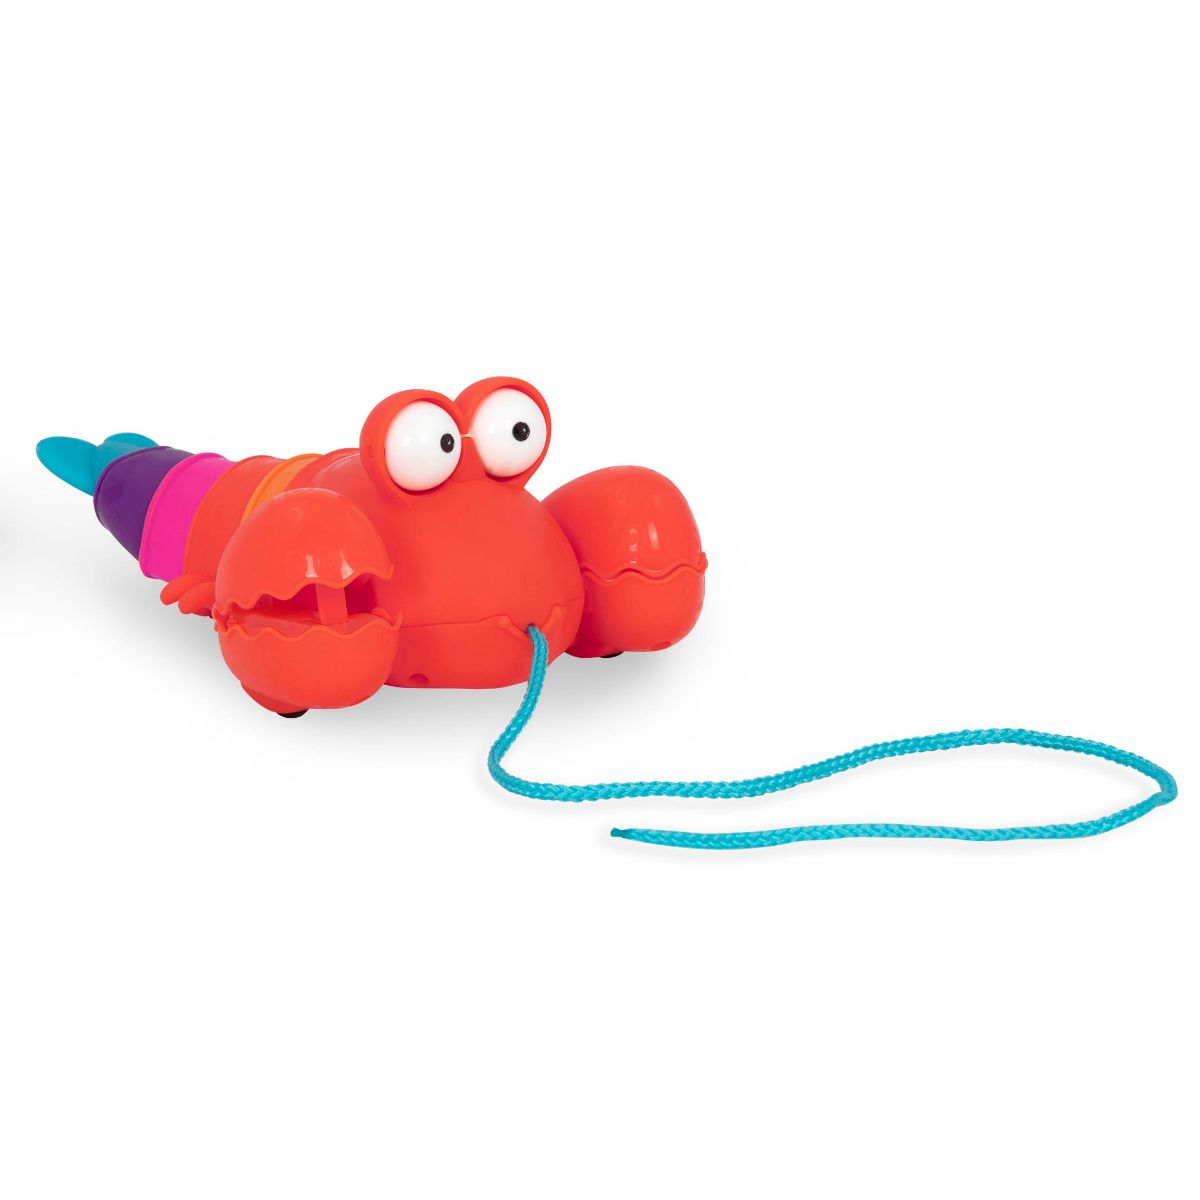 Pull-along lobster toy.